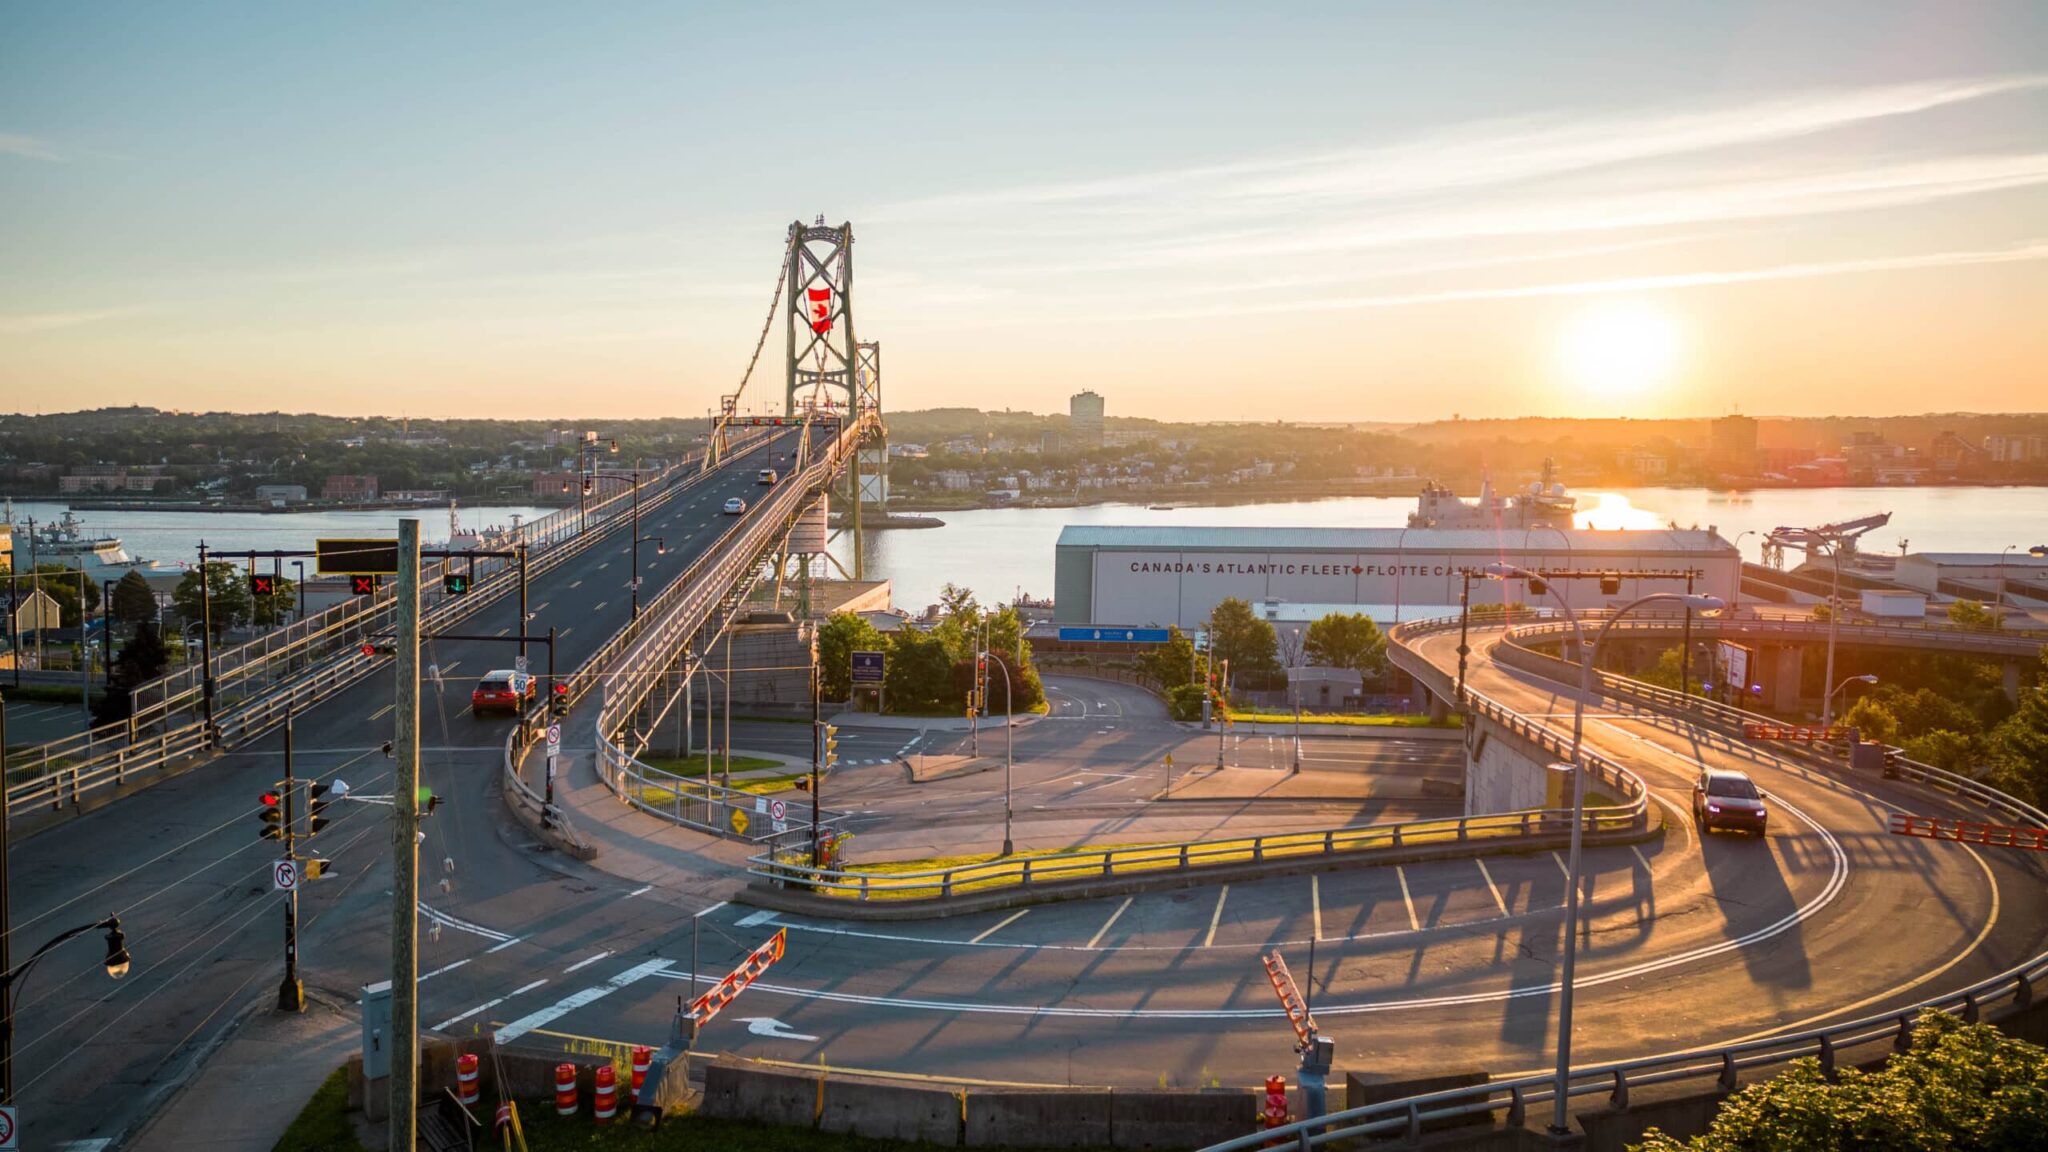 A vehicle drives on the Barrington Street ramp to the Macdonald Bridge at sunset. The Canadian flag flies in the tower of the bridge in the background.